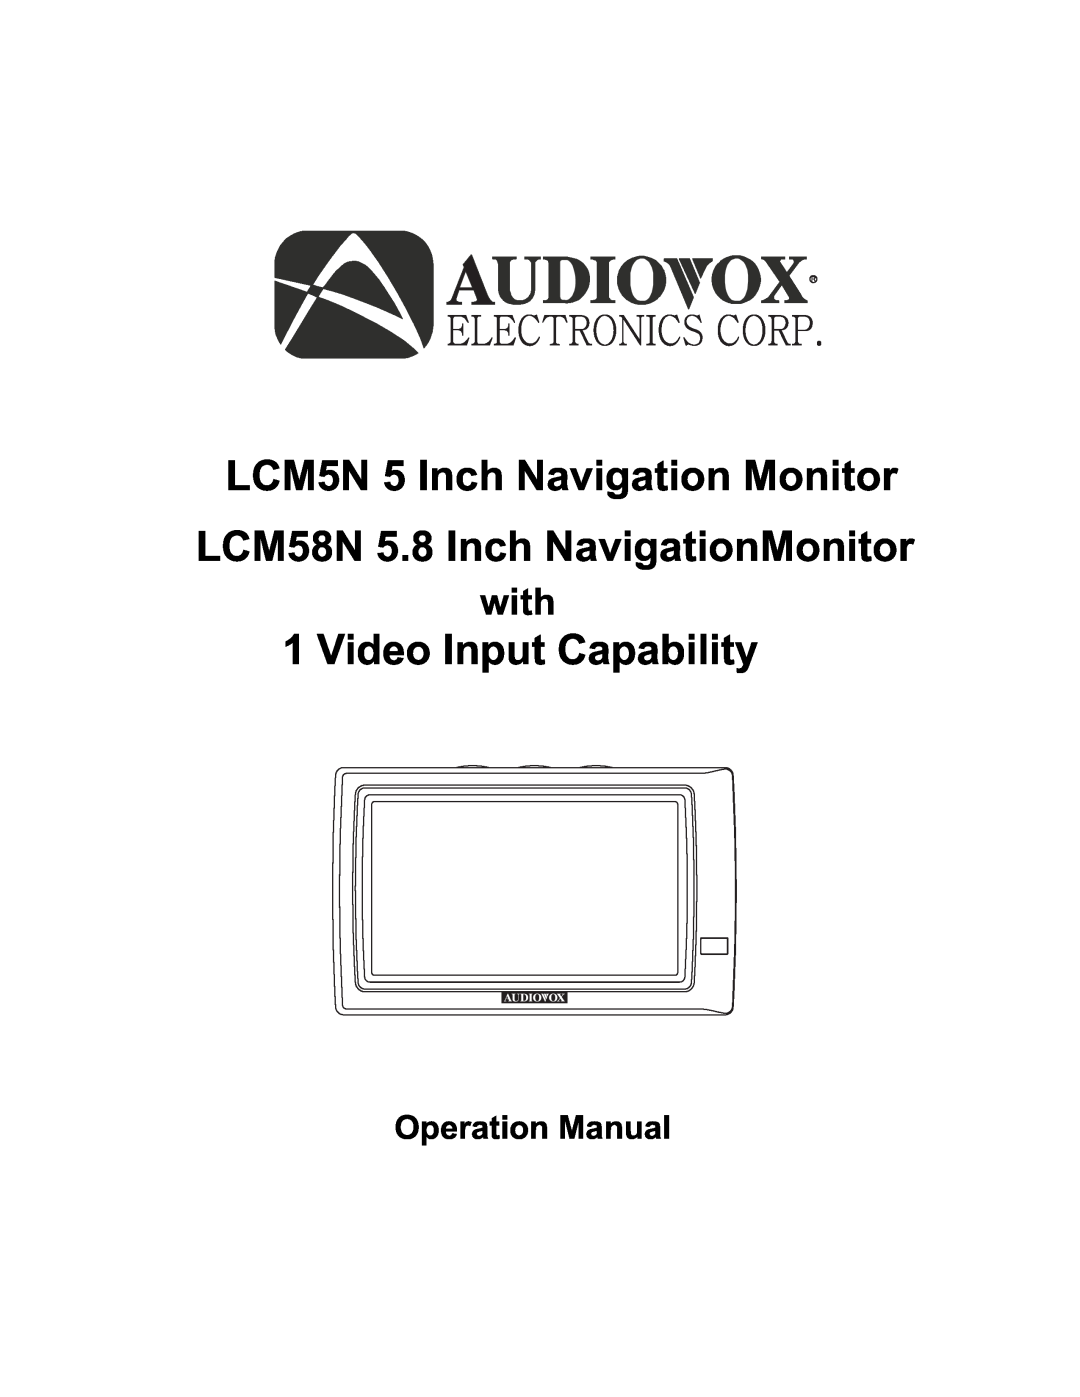 Audiovox operation manual Operation Manual, LCM5N 5 Inch Navigation Monitor LCM58N 5.8 Inch NavigationMonitor, with 